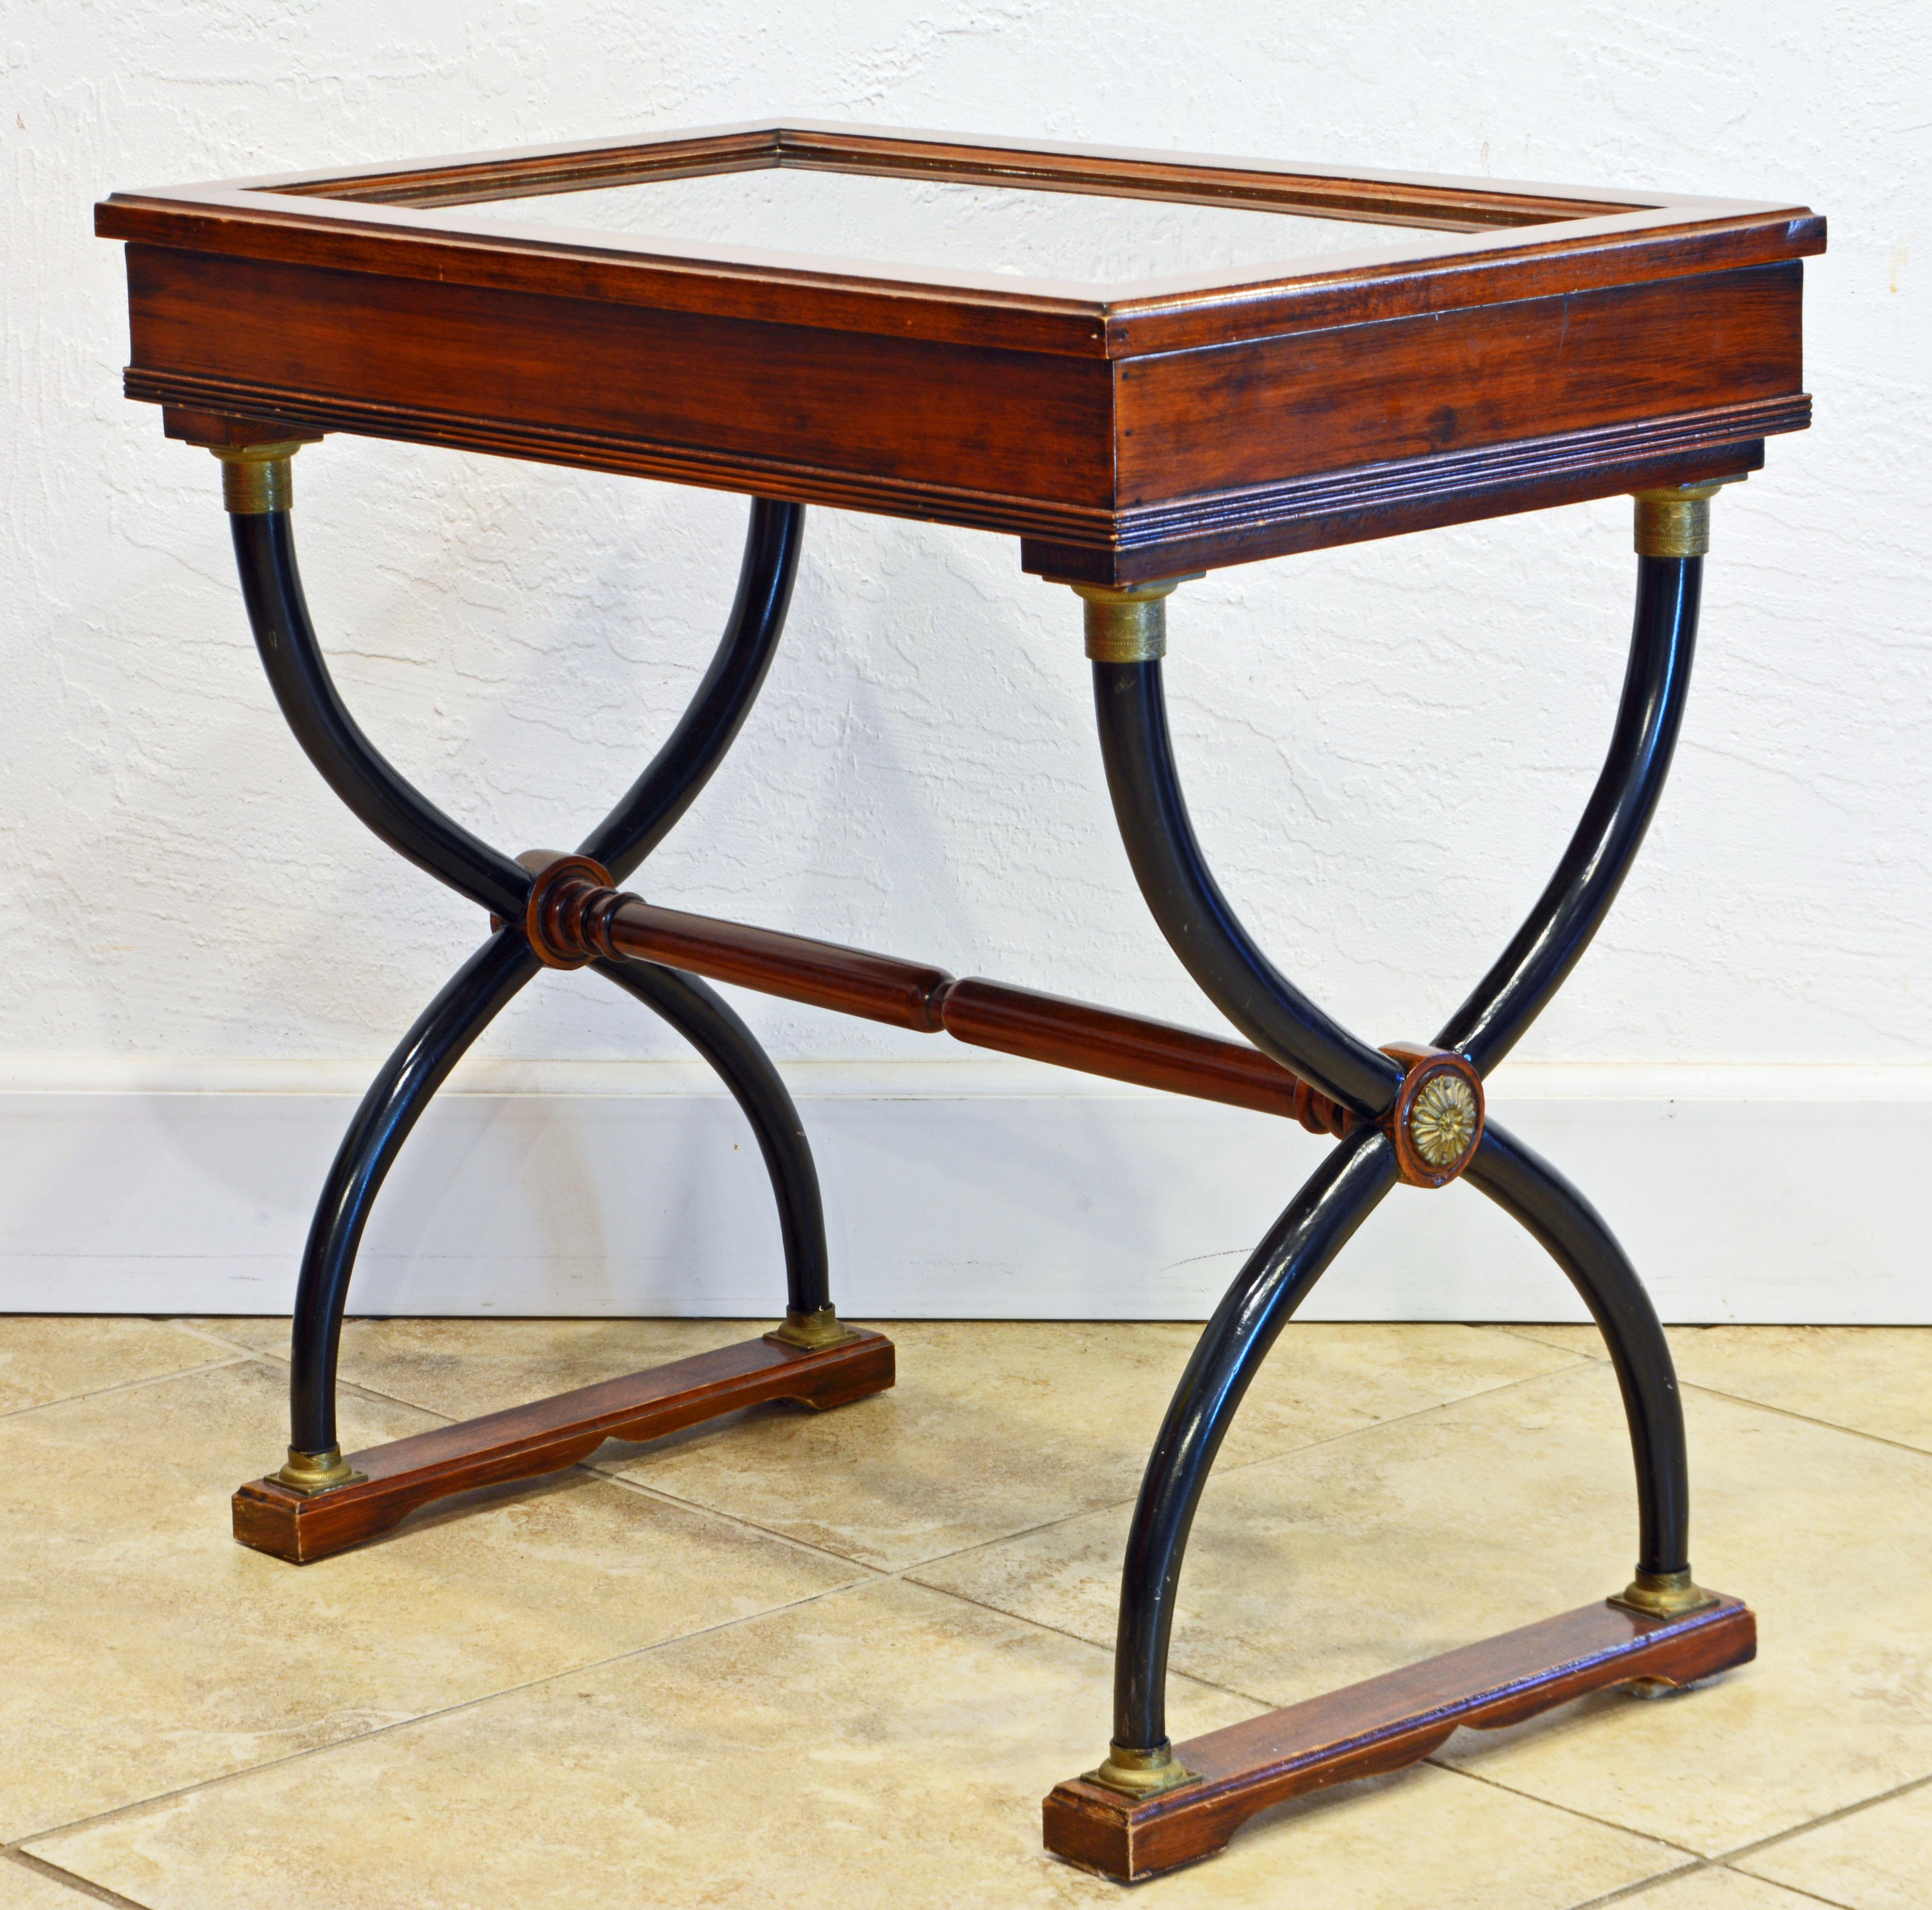 Resting on double sets of curule style ebonized and bronze mounted legs joined by a turned stretcher with bronze rosettes this walnut vitrine table features a glazed top opening up to the display interior. Early 20th century.